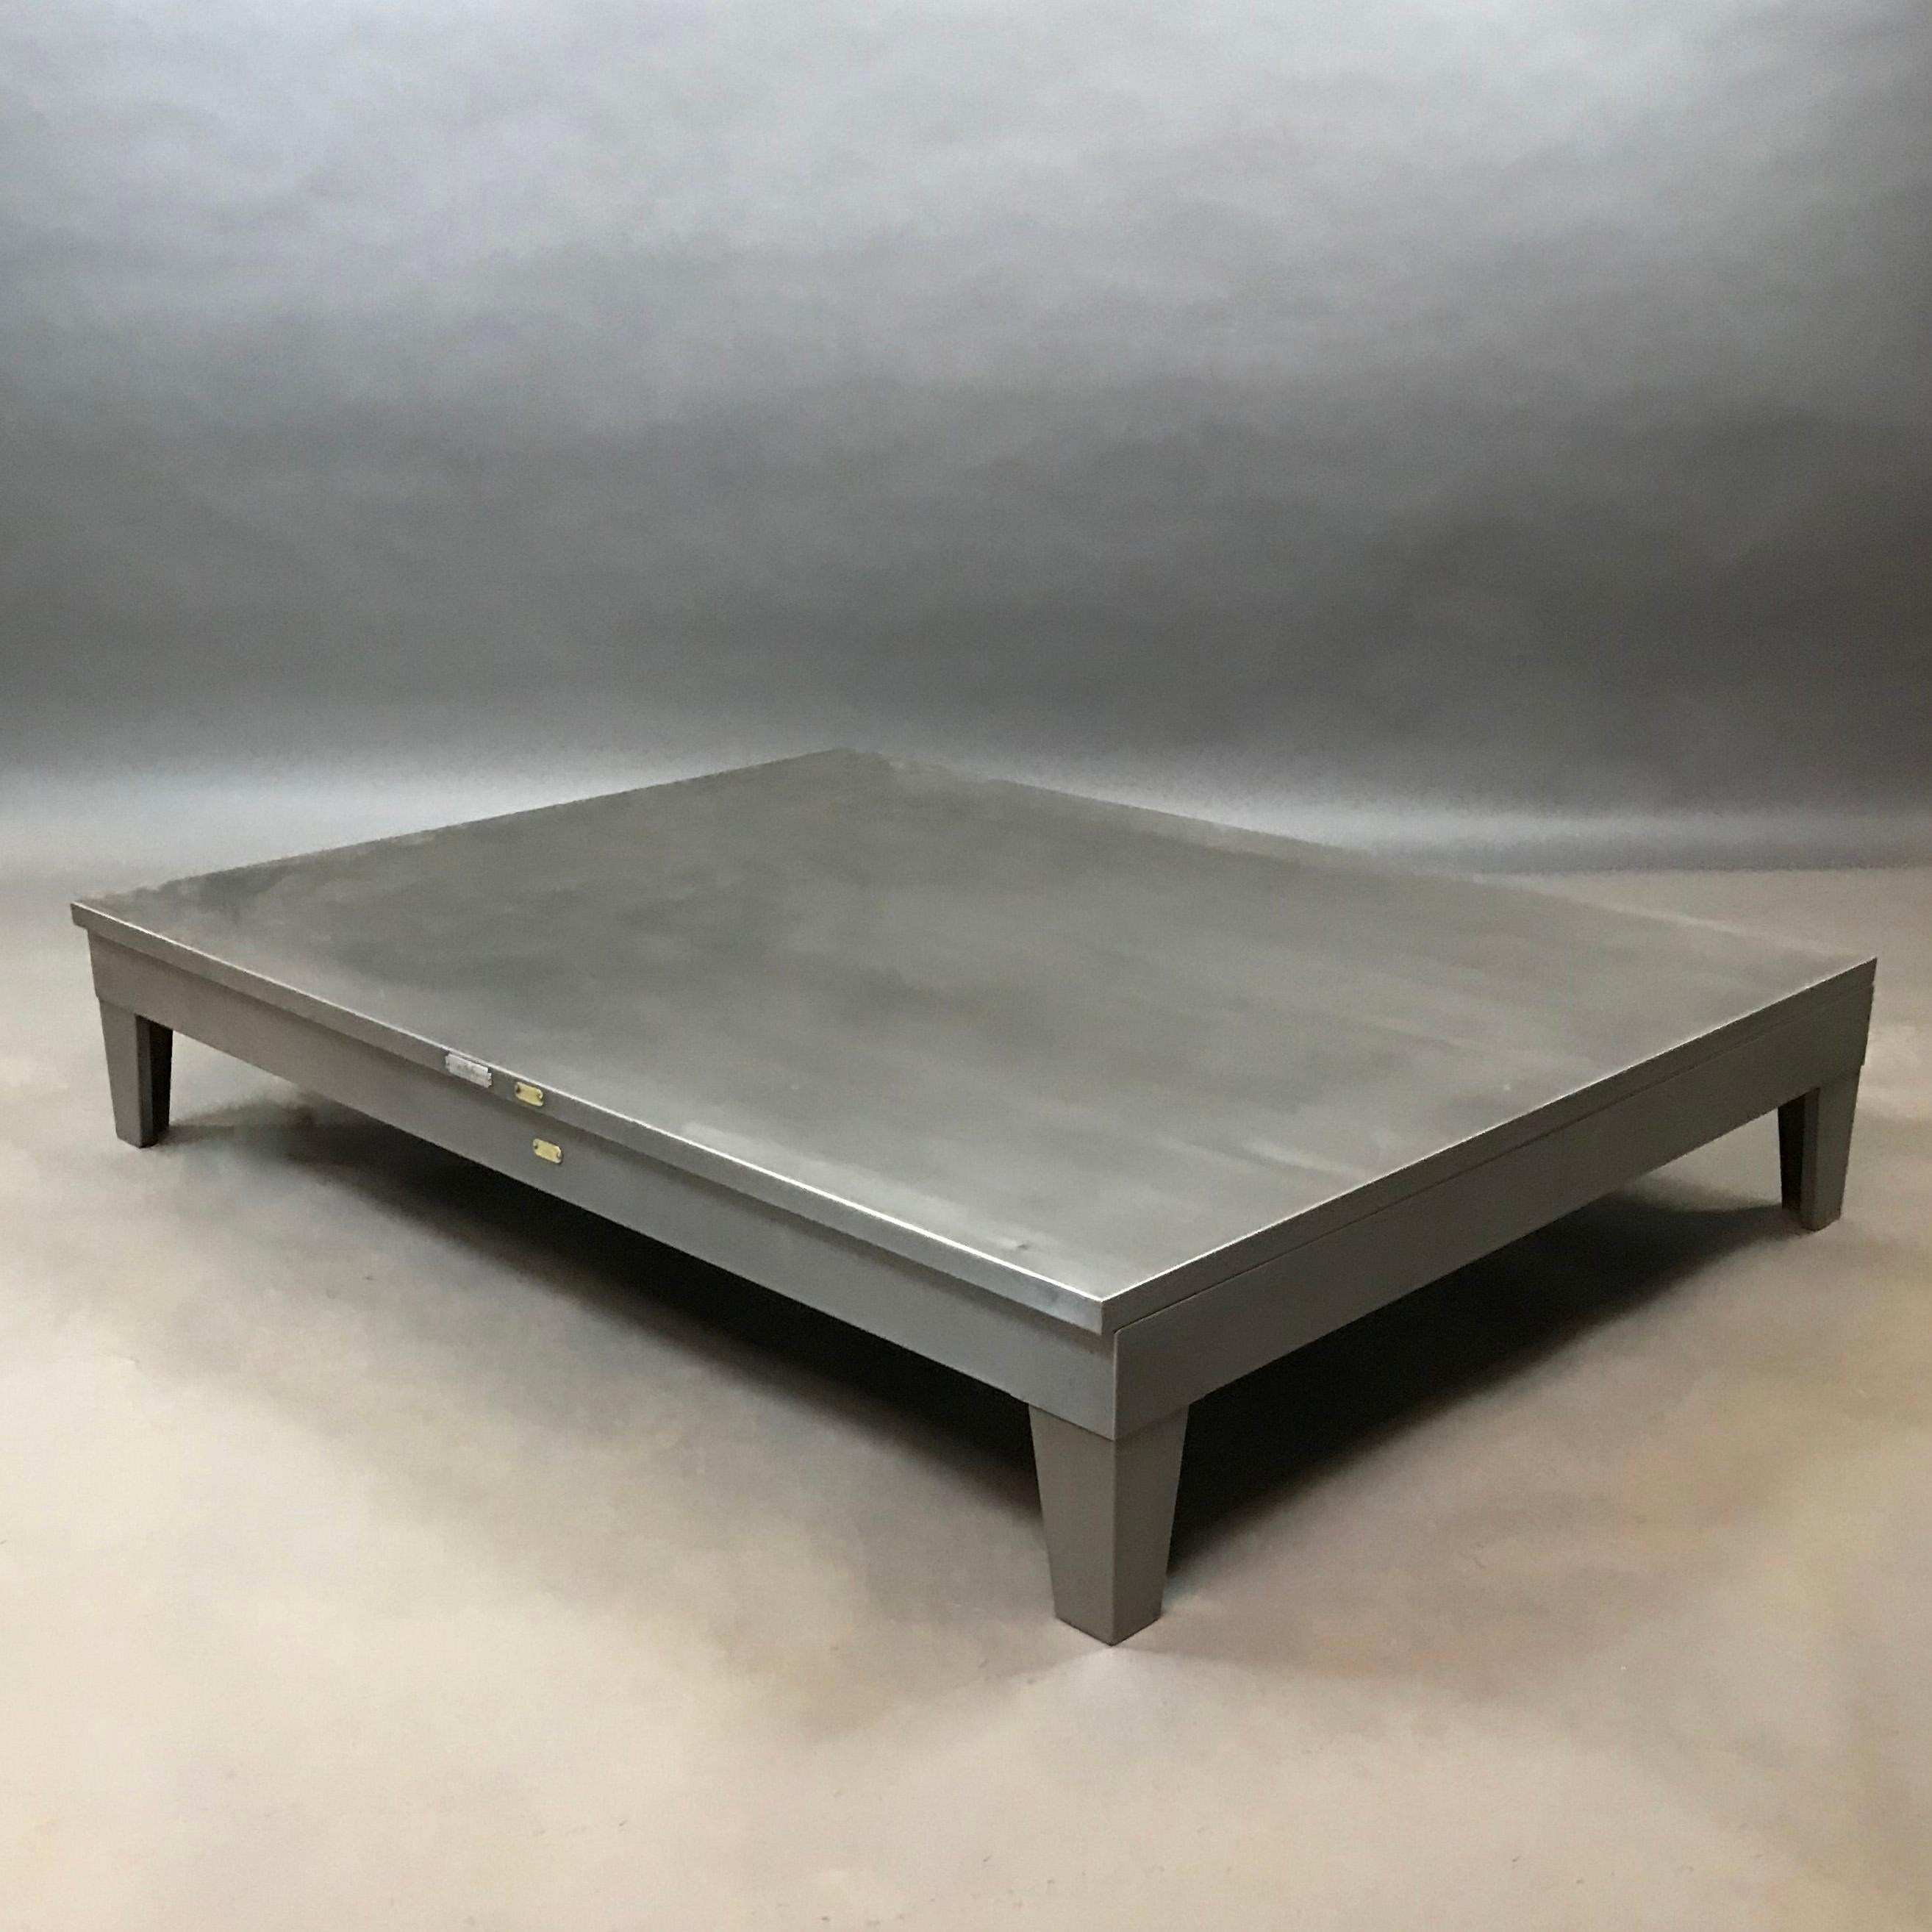 Large, low, midcentury, brushed steel base by Steel Age makes a fantastic industrial coffee table as is or can be built upon.